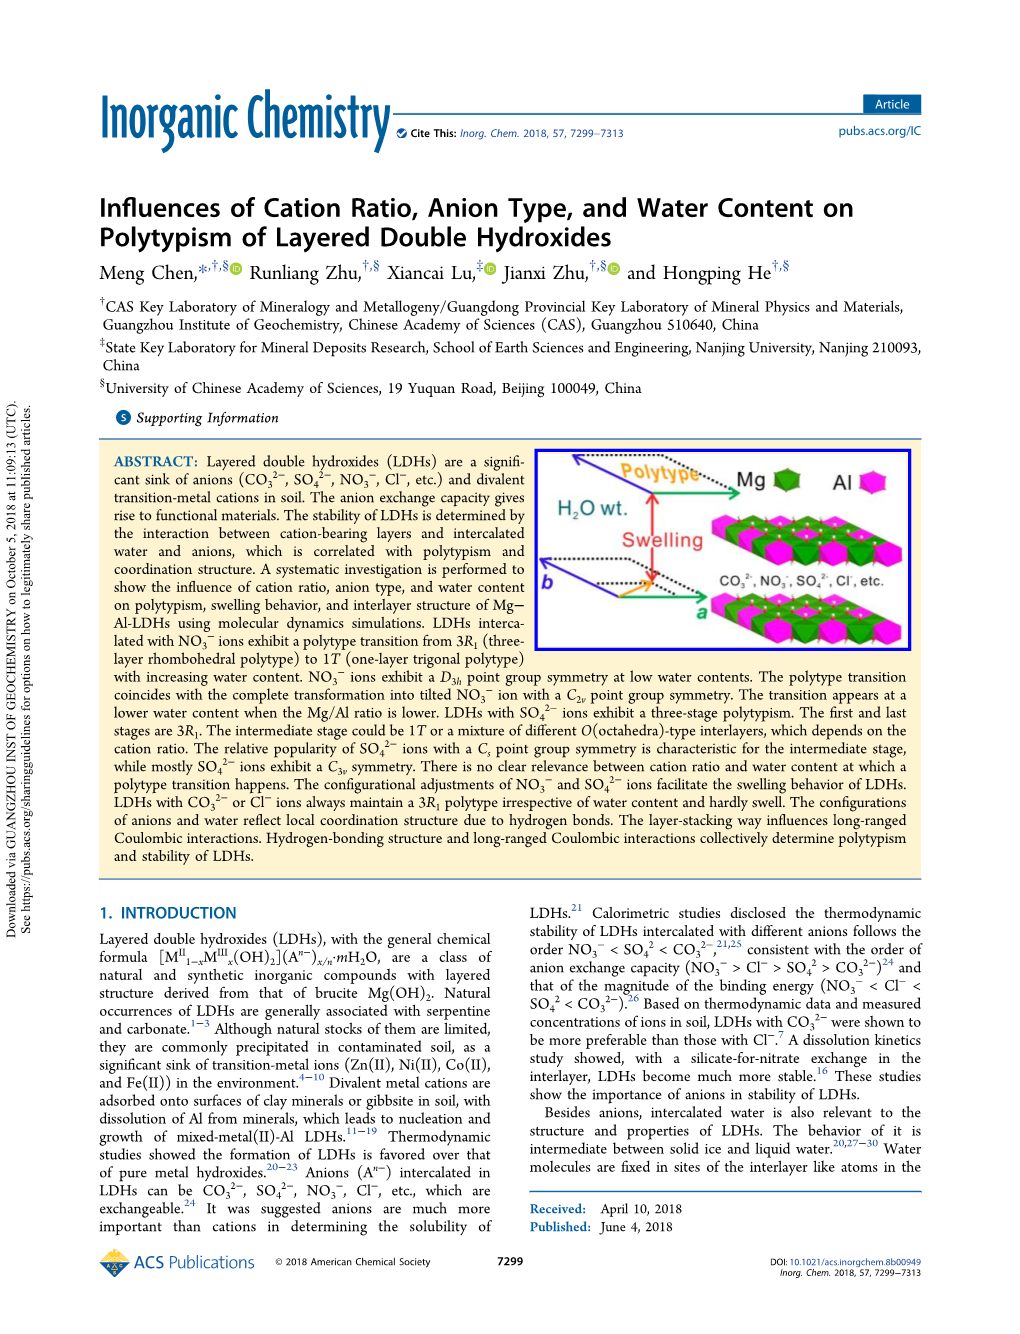 Influences of Cation Ratio, Anion Type, and Water Content on Polytypism